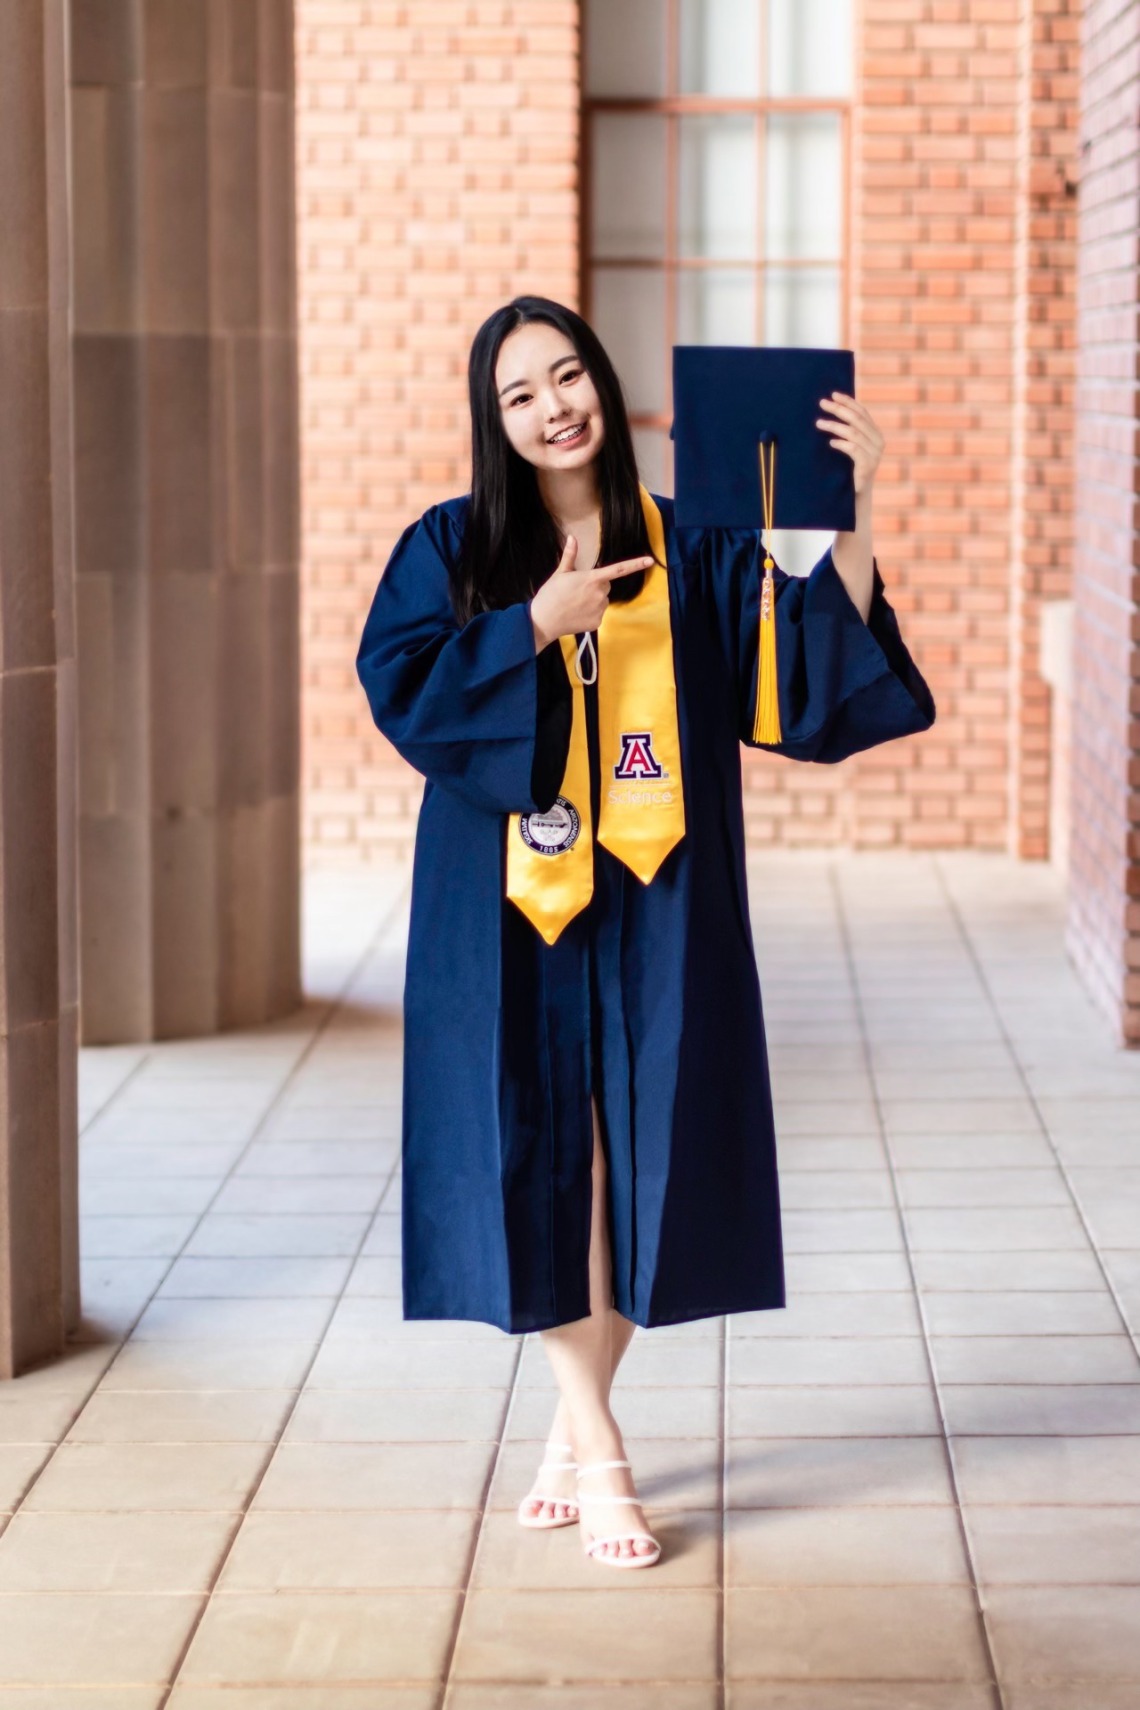 Chloe Park wearing a graduation gown and holding a graduation cap